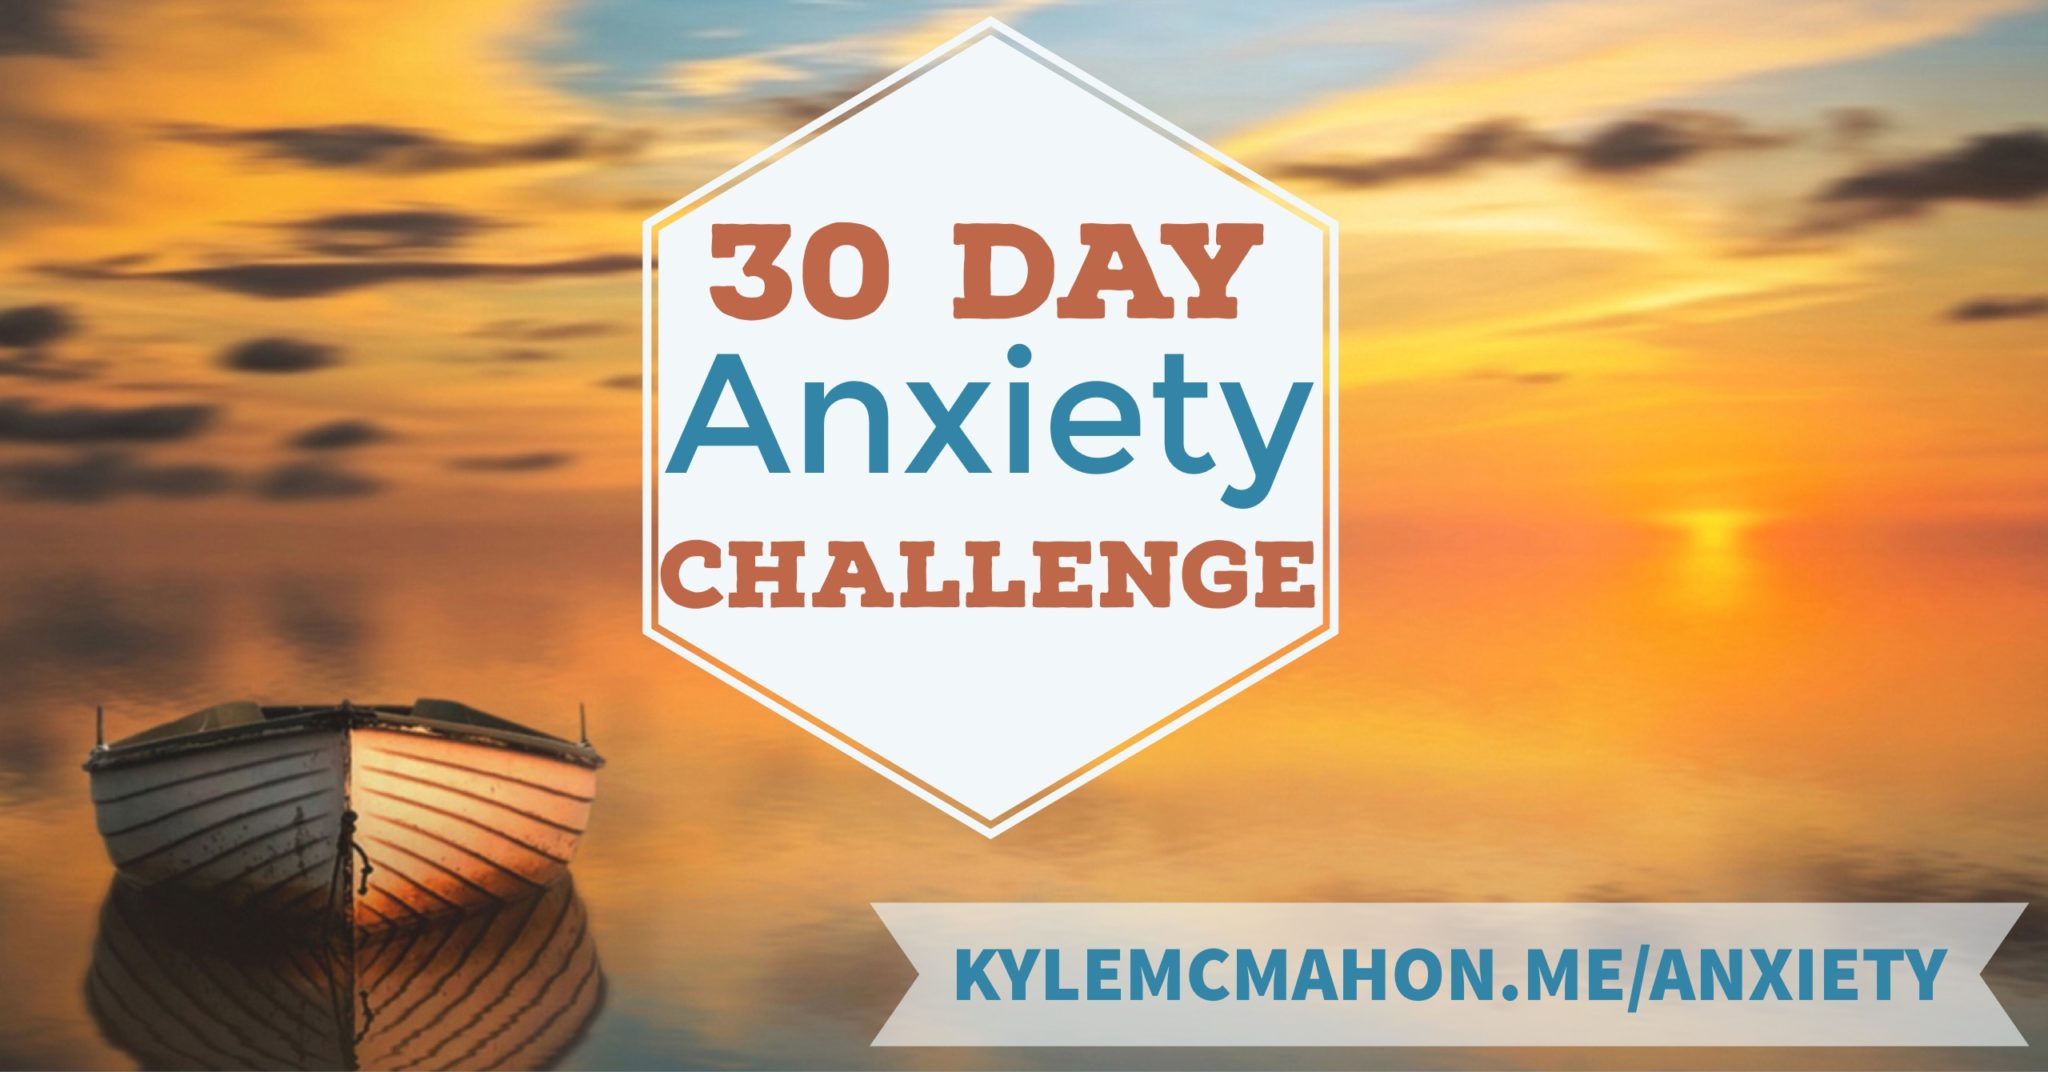 Join the 30 Day Anxiety Challenge with Kyle McMahon. An absolutely free program designed to teach you new, simple ways to help manage your anxiety